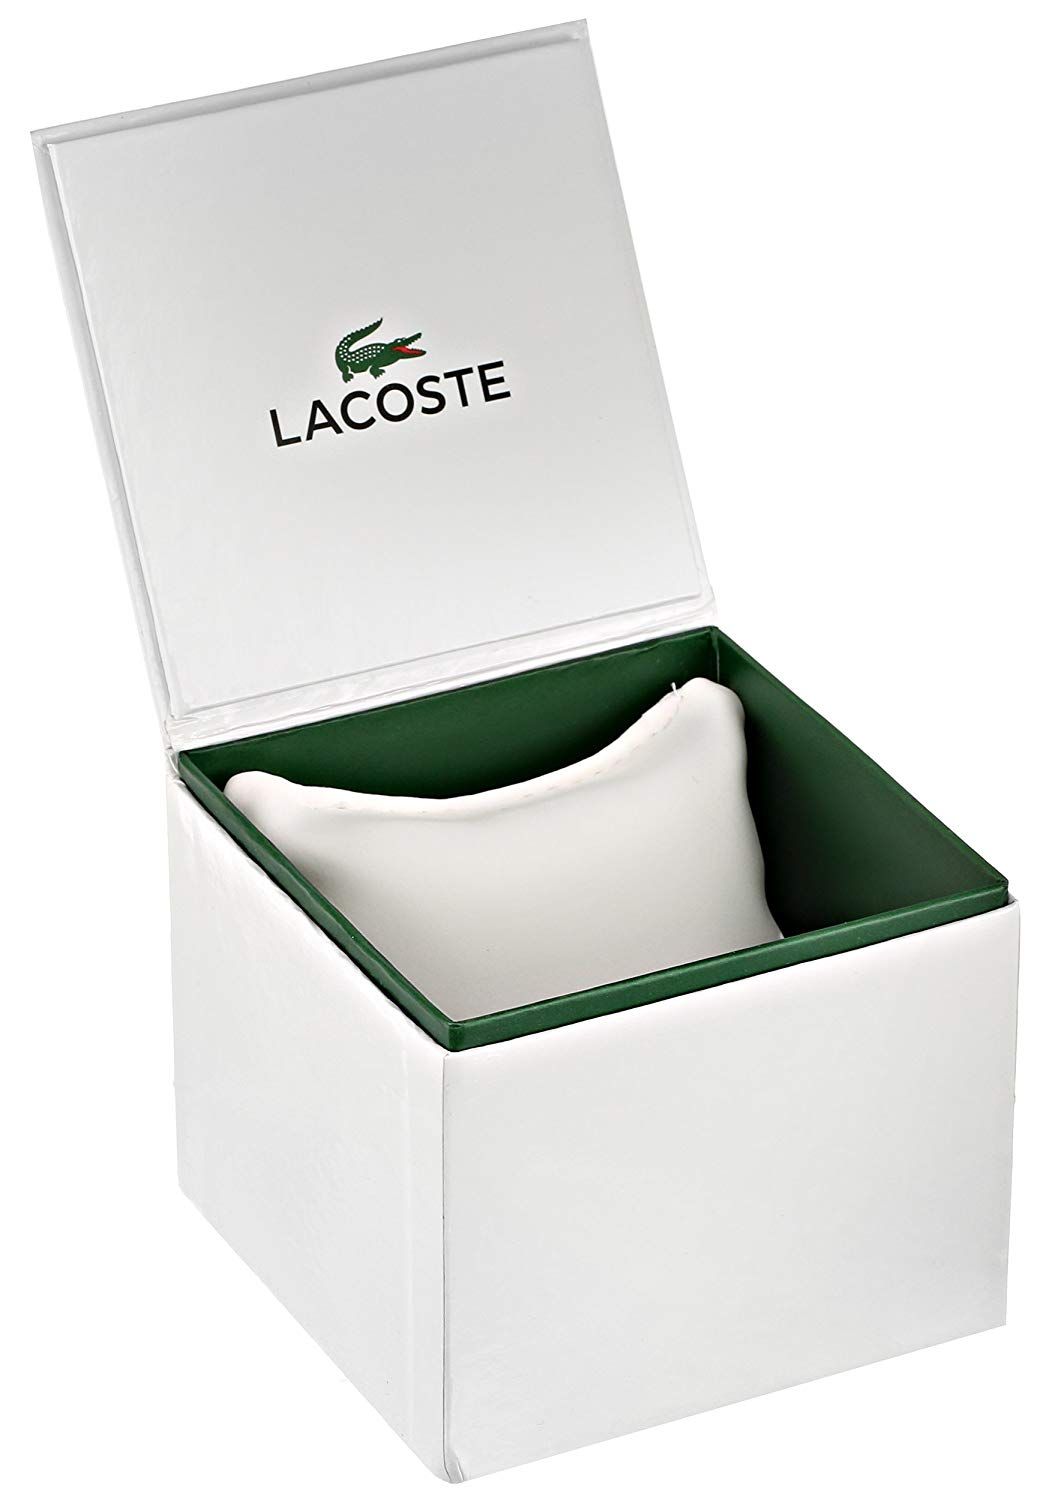 This Lacoste 12.12 Multi Dial Watch for Women is the perfect timepiece to wear or to gift. It's Rose gold 36 mm Round case combined with the comfortable Taupe Leather will ensure you enjoy this stunning timepiece without any compromise. Operated by a high quality Quartz movement and water resistant to 5 bars, your watch will keep ticking. Elegant and fashionable watch that is suitable for the daily life of every Women  -The watch has a Calendar function: Day-Date, 24-hour Display High quality 19 cm length and 15 mm width Taupe Leather strap with a Buckle Case diameter: 36 mm,case thickness: 10 mm, case colour: Rose Gold and dial colour: Rose gold